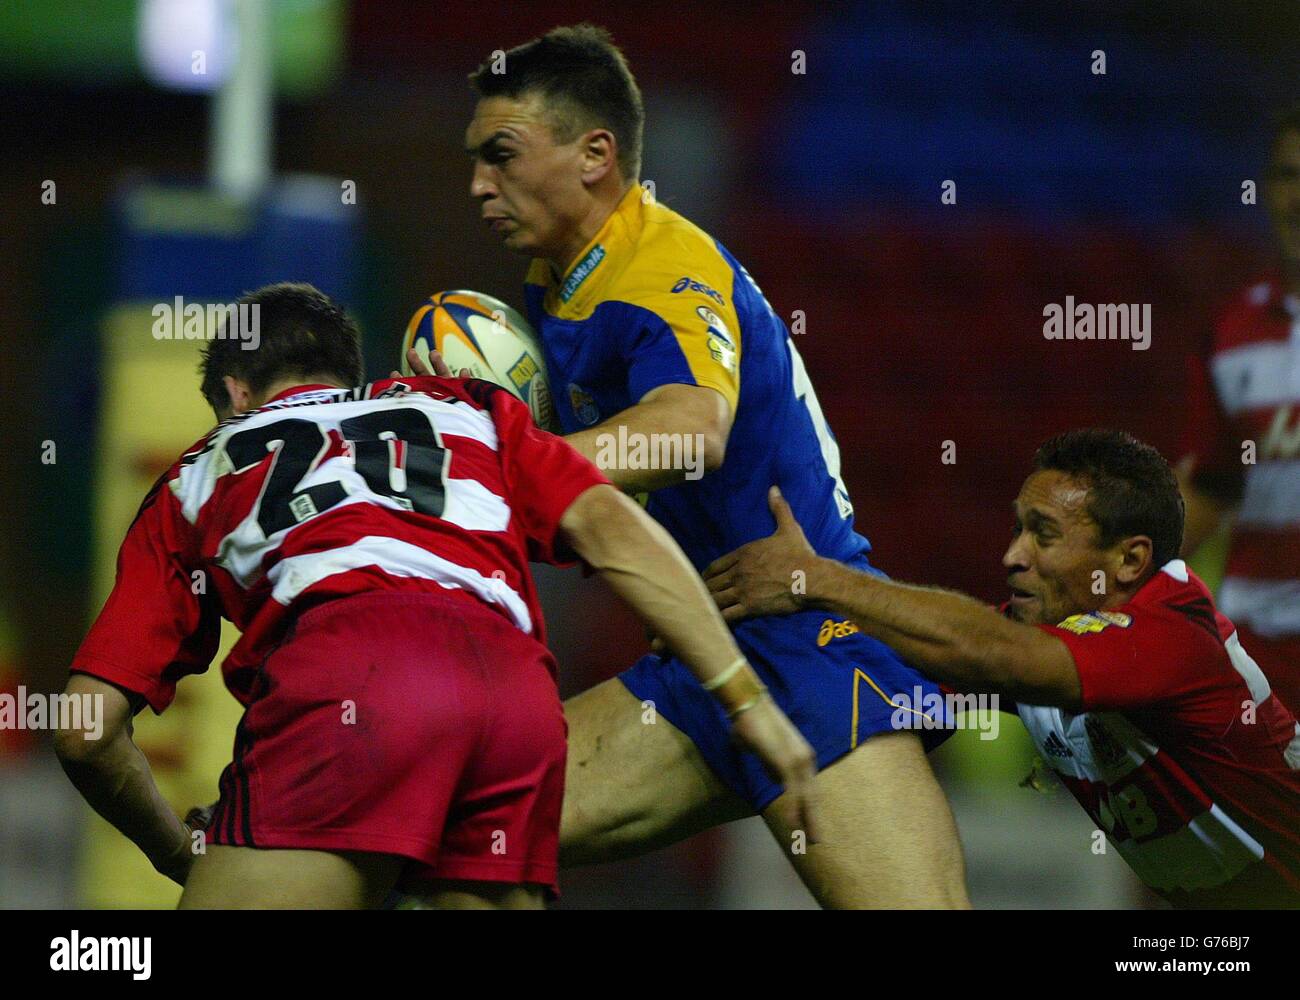 Leeds Rhinos Kevin Sinfield skips past Wigan Warriors Martin Aspinwall (left) and Adrian Lam to score a try, during the Tetleys Super League Semi-Final at the JJB Stadium in Wigan. Stock Photo